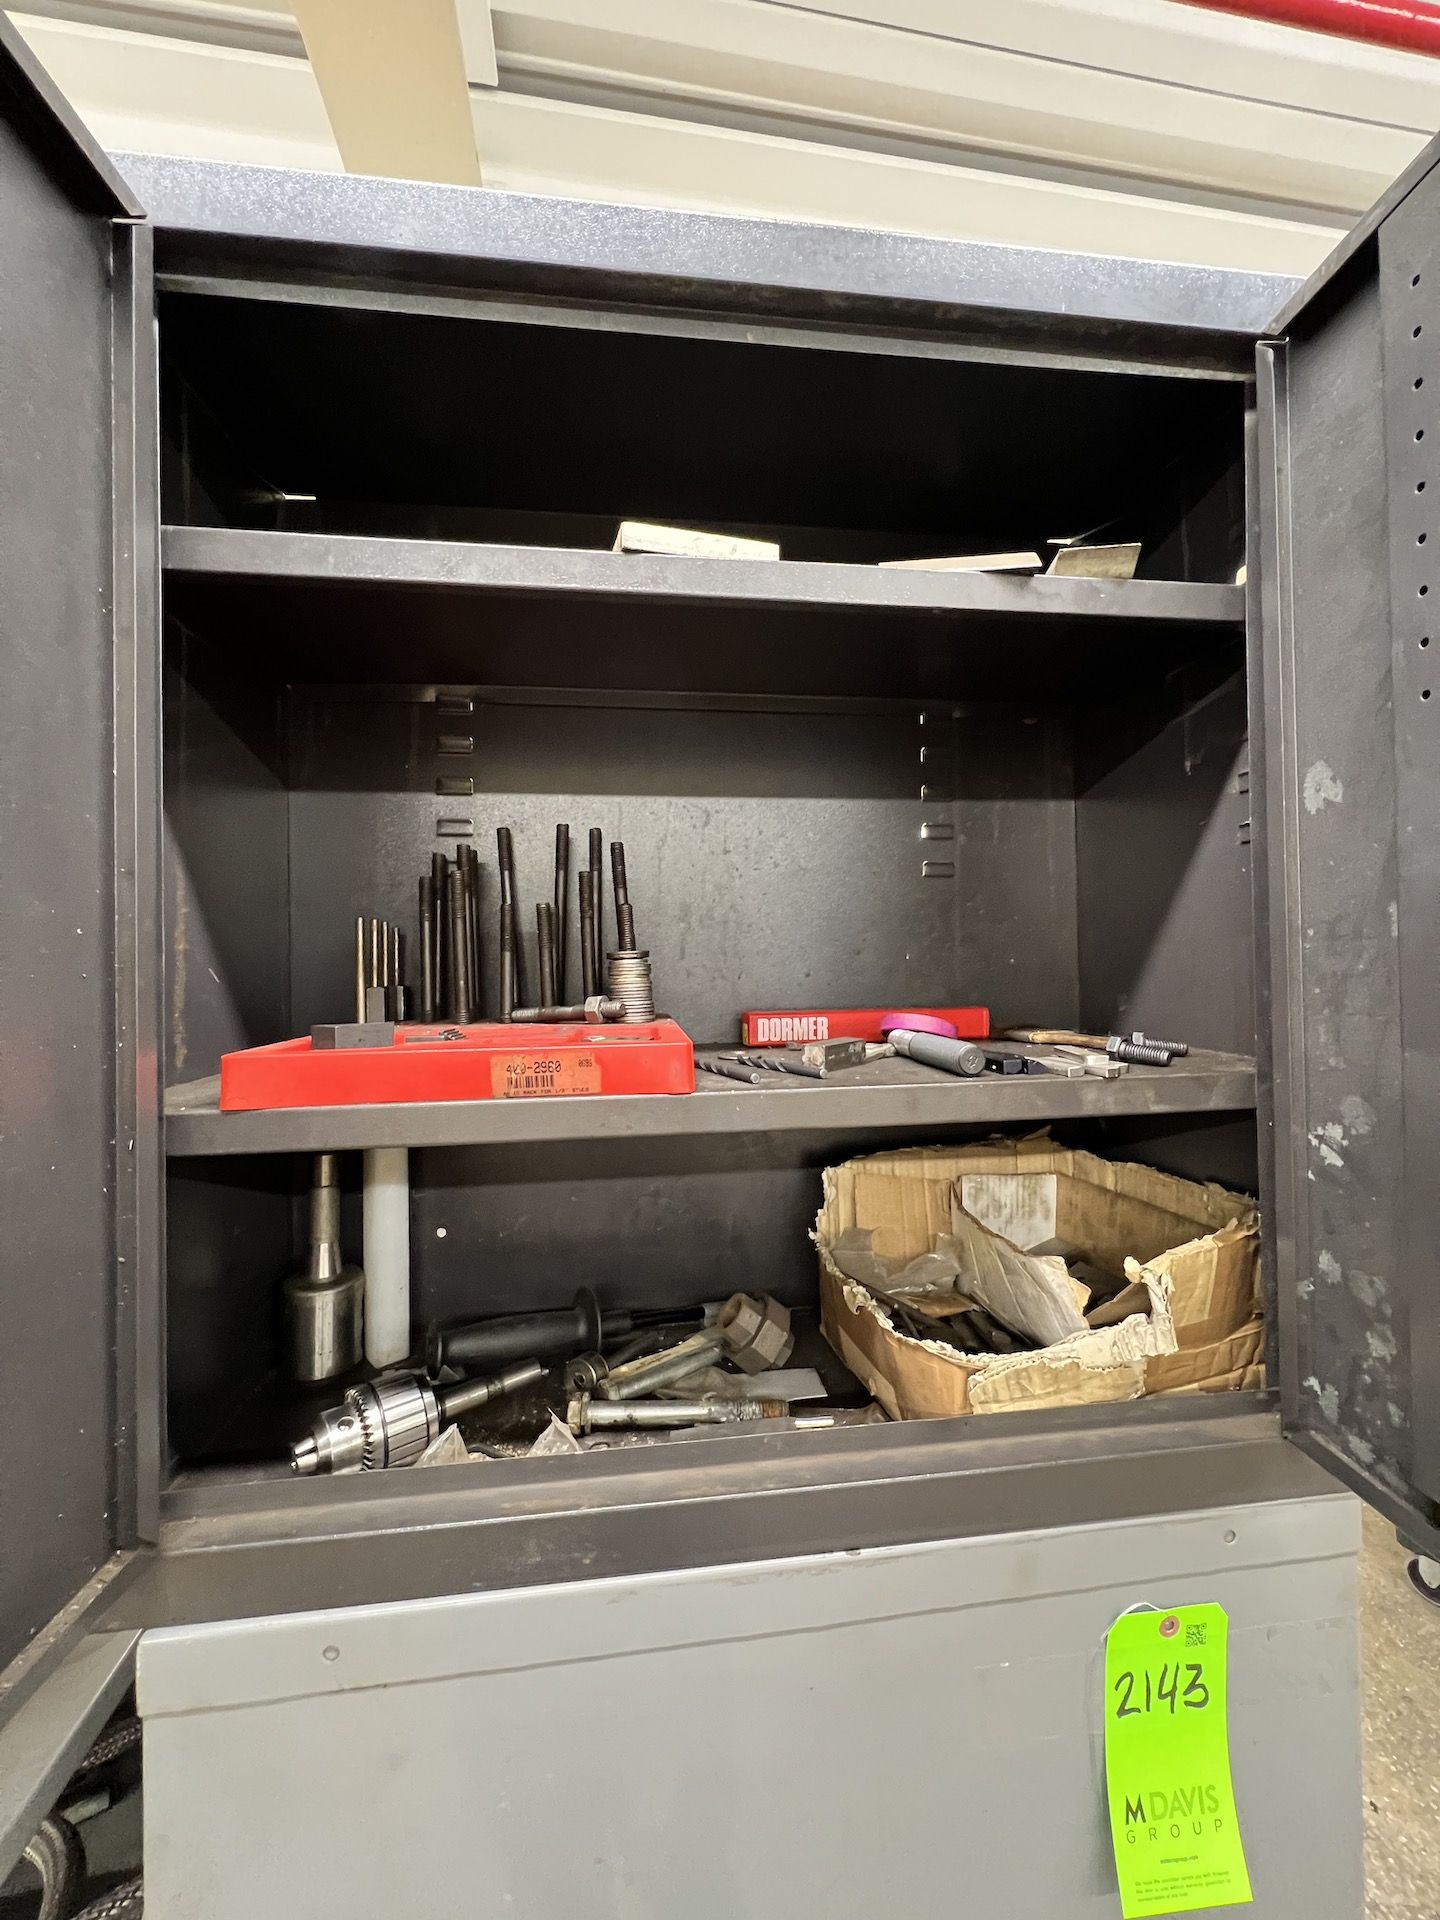 (2) PARS CABINETS WITH CONTENTS, INCLUDES STOR-LOC CABINET, DRILL BITS, HARWARE, TAPS, DIES, AND - Image 2 of 16